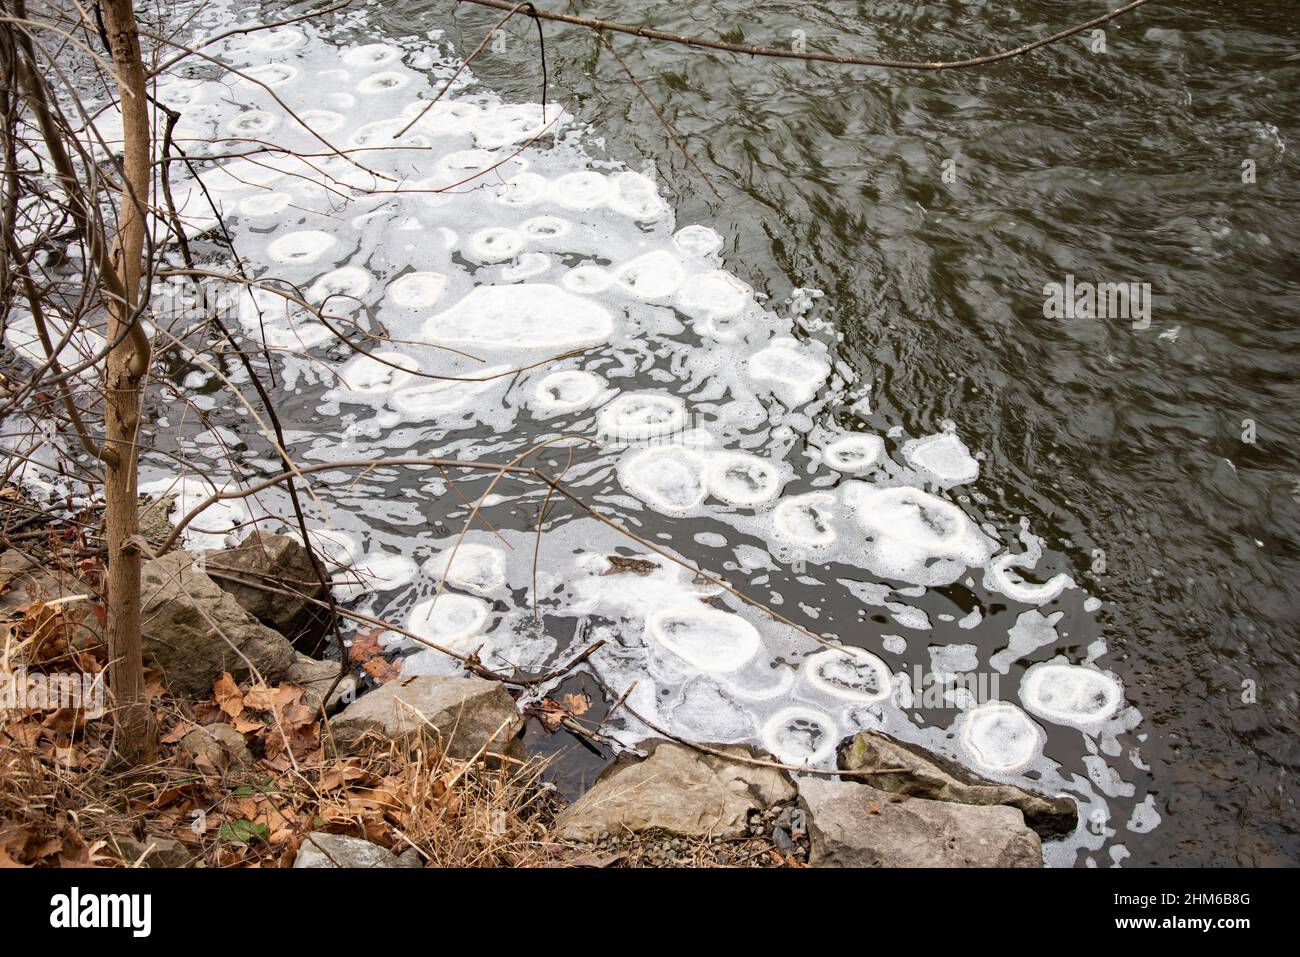 Ice discs, ice circles, ice pans, ice pancakes or ice crepes are a very rare natural phenomenon that occurs in slow moving water in cold climates. Stock Photo